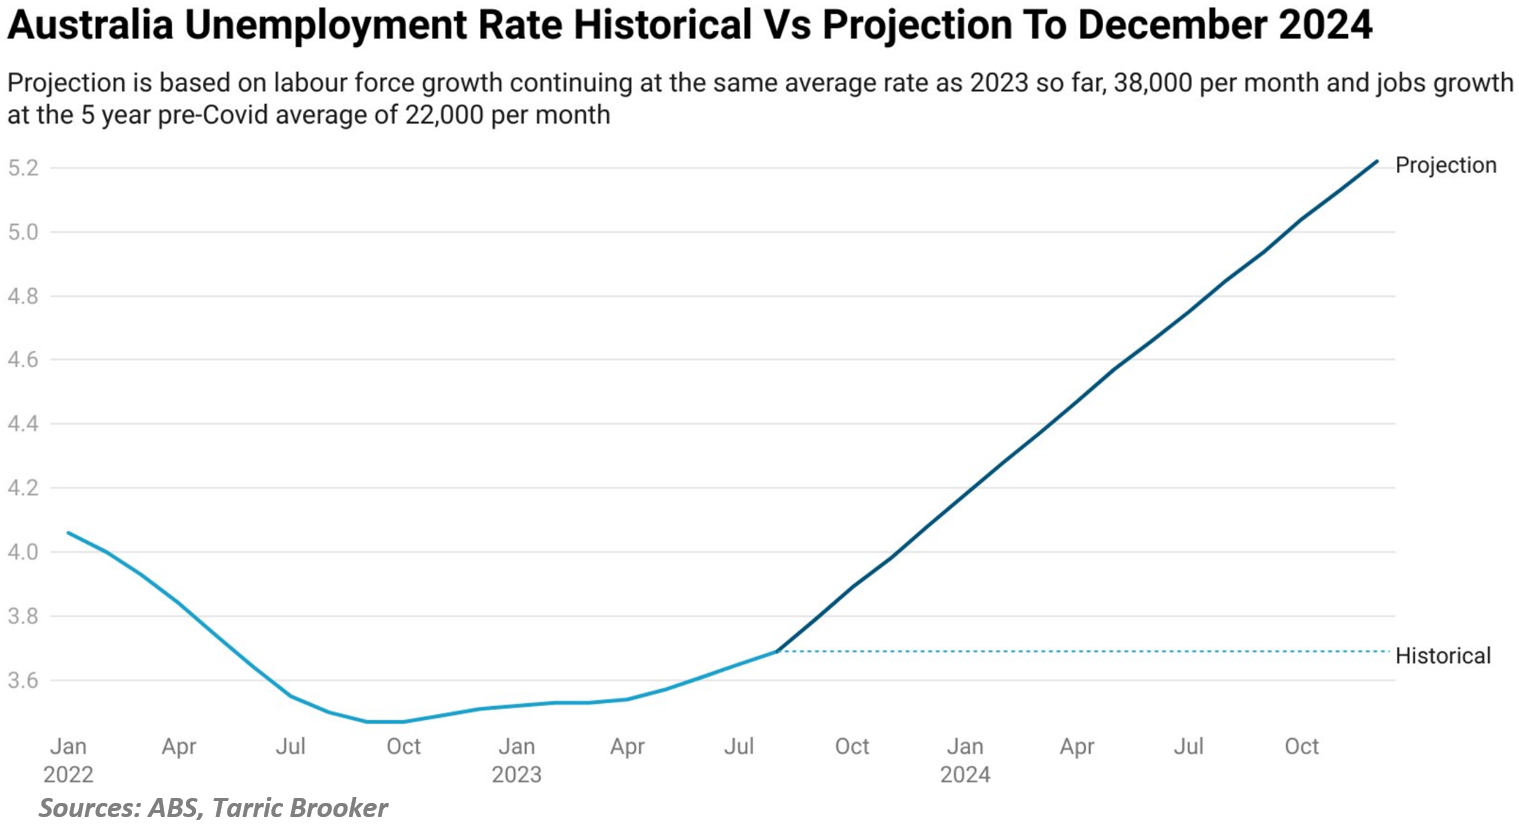 Projected unemployment rate